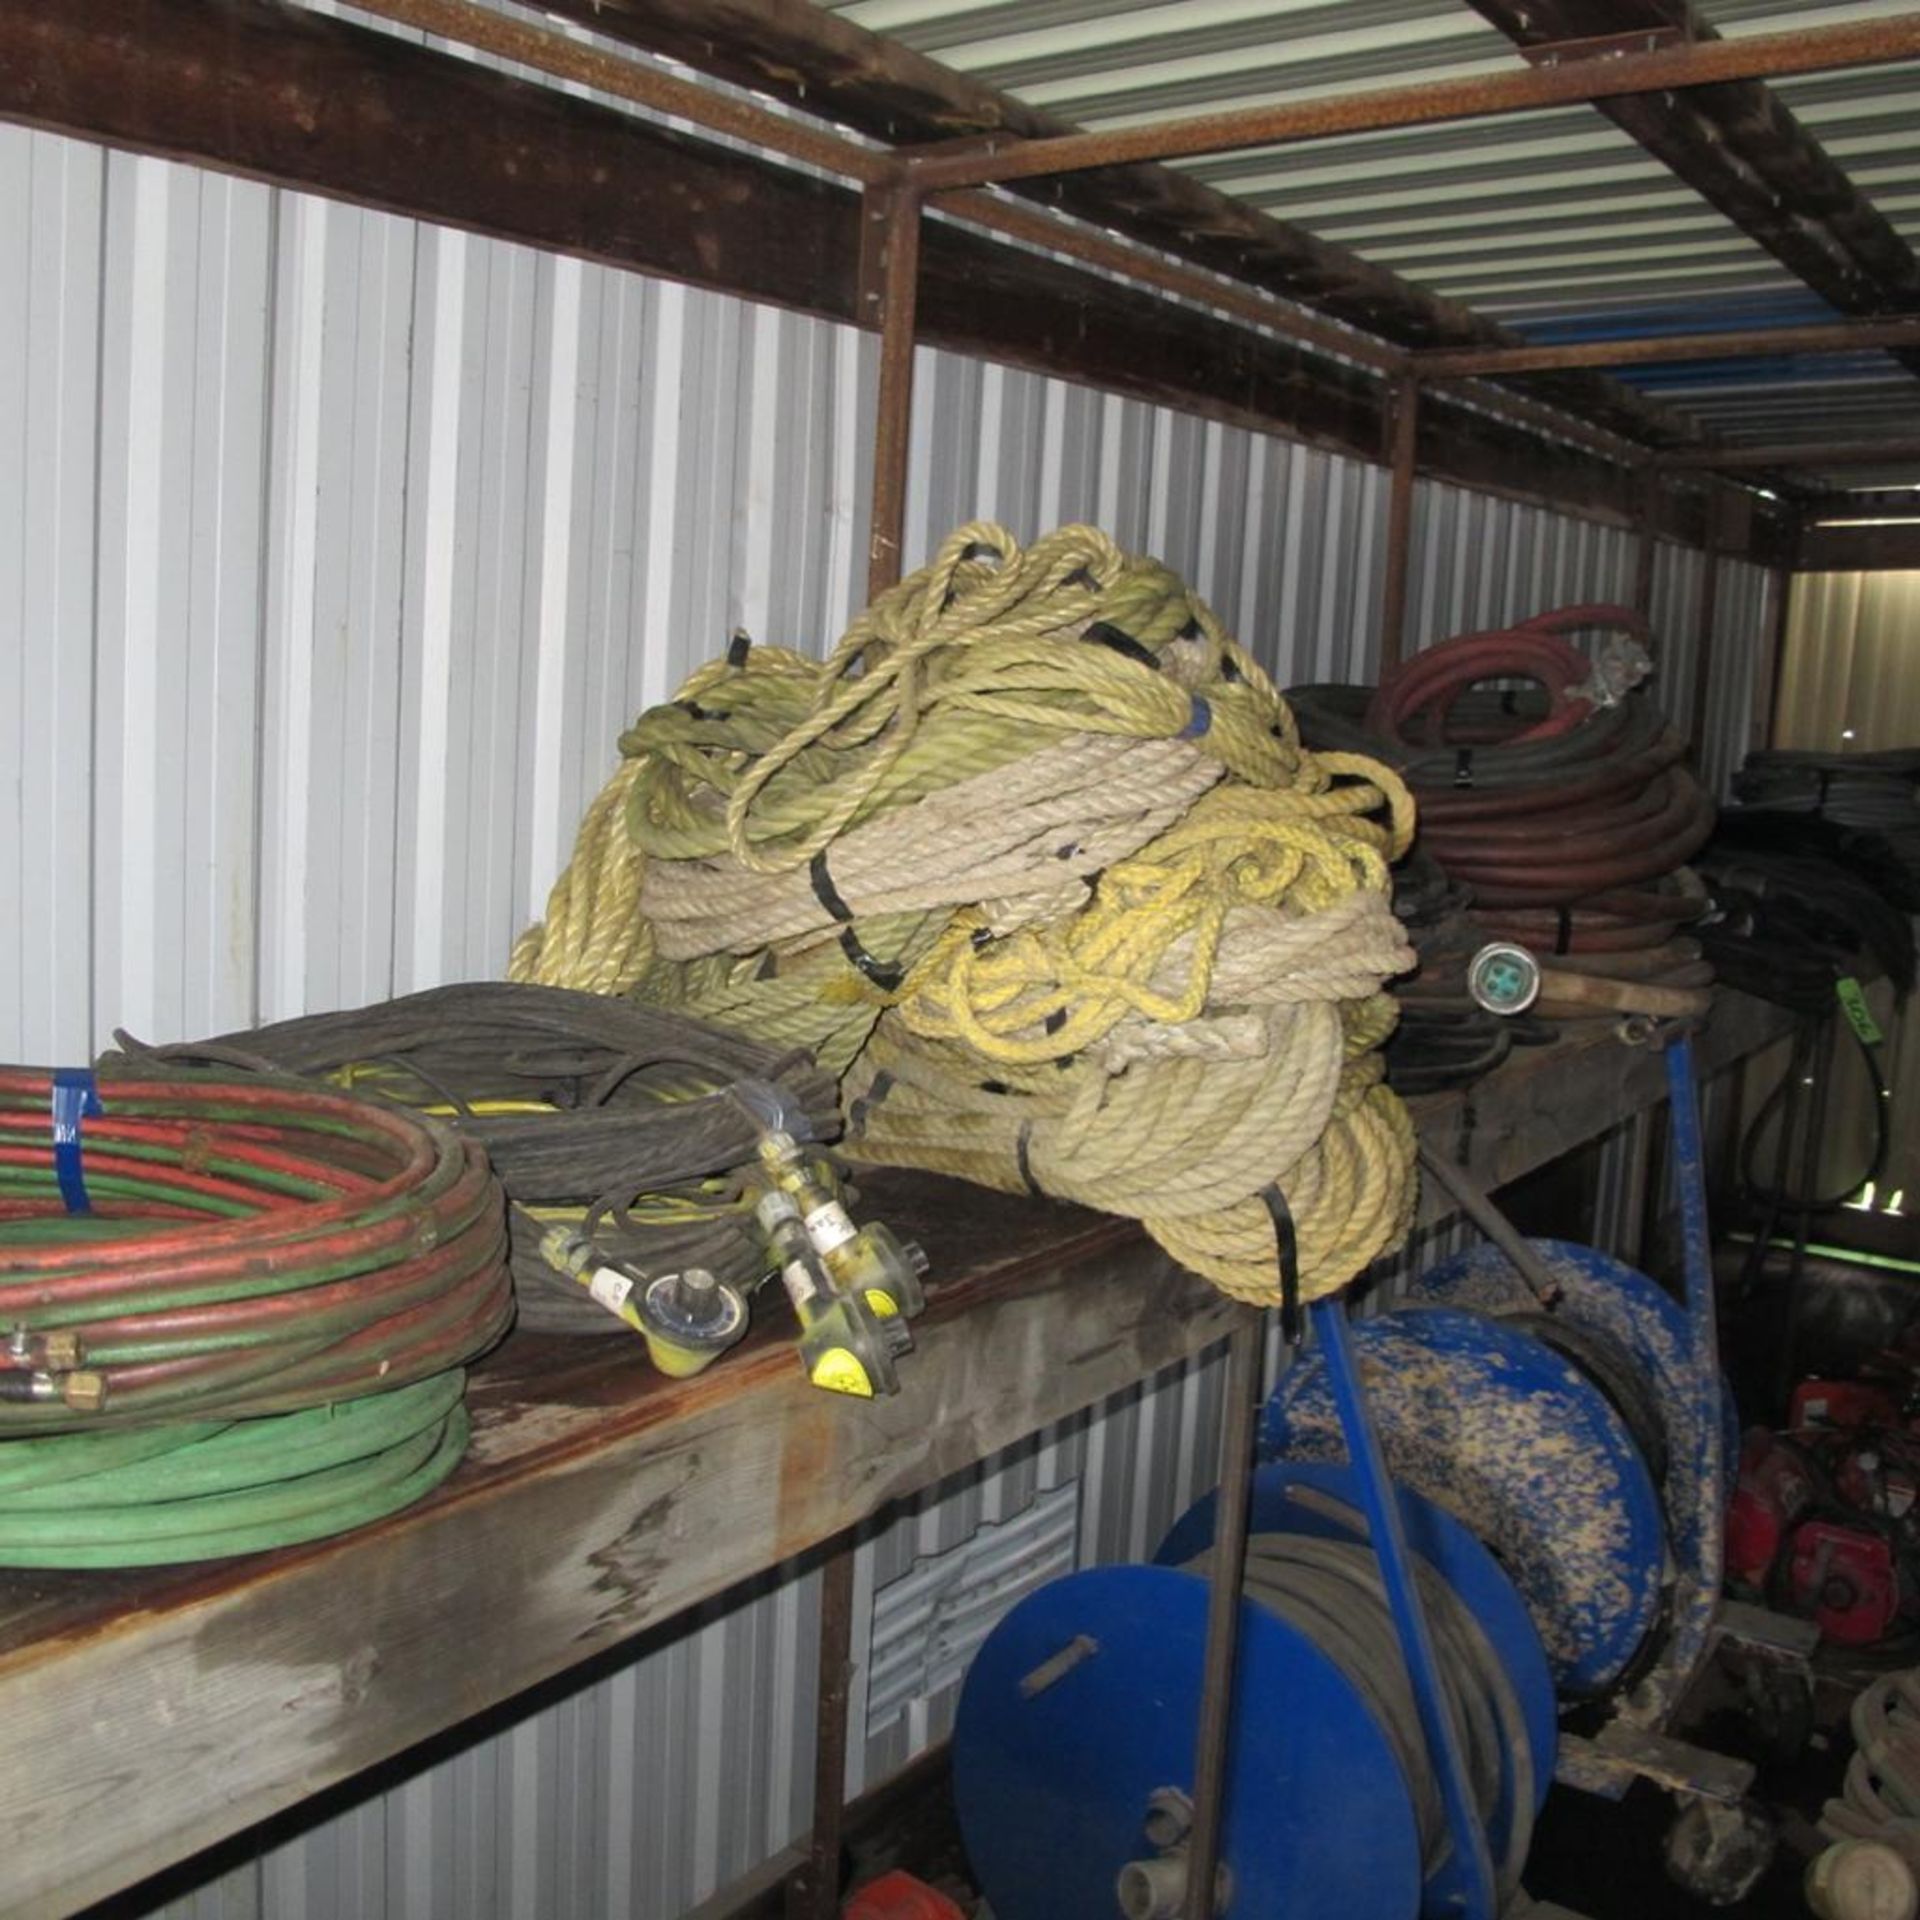 WELDING CABLES, HOSES, ROPE ON SHELF (NORTH BLDG) - Image 2 of 2